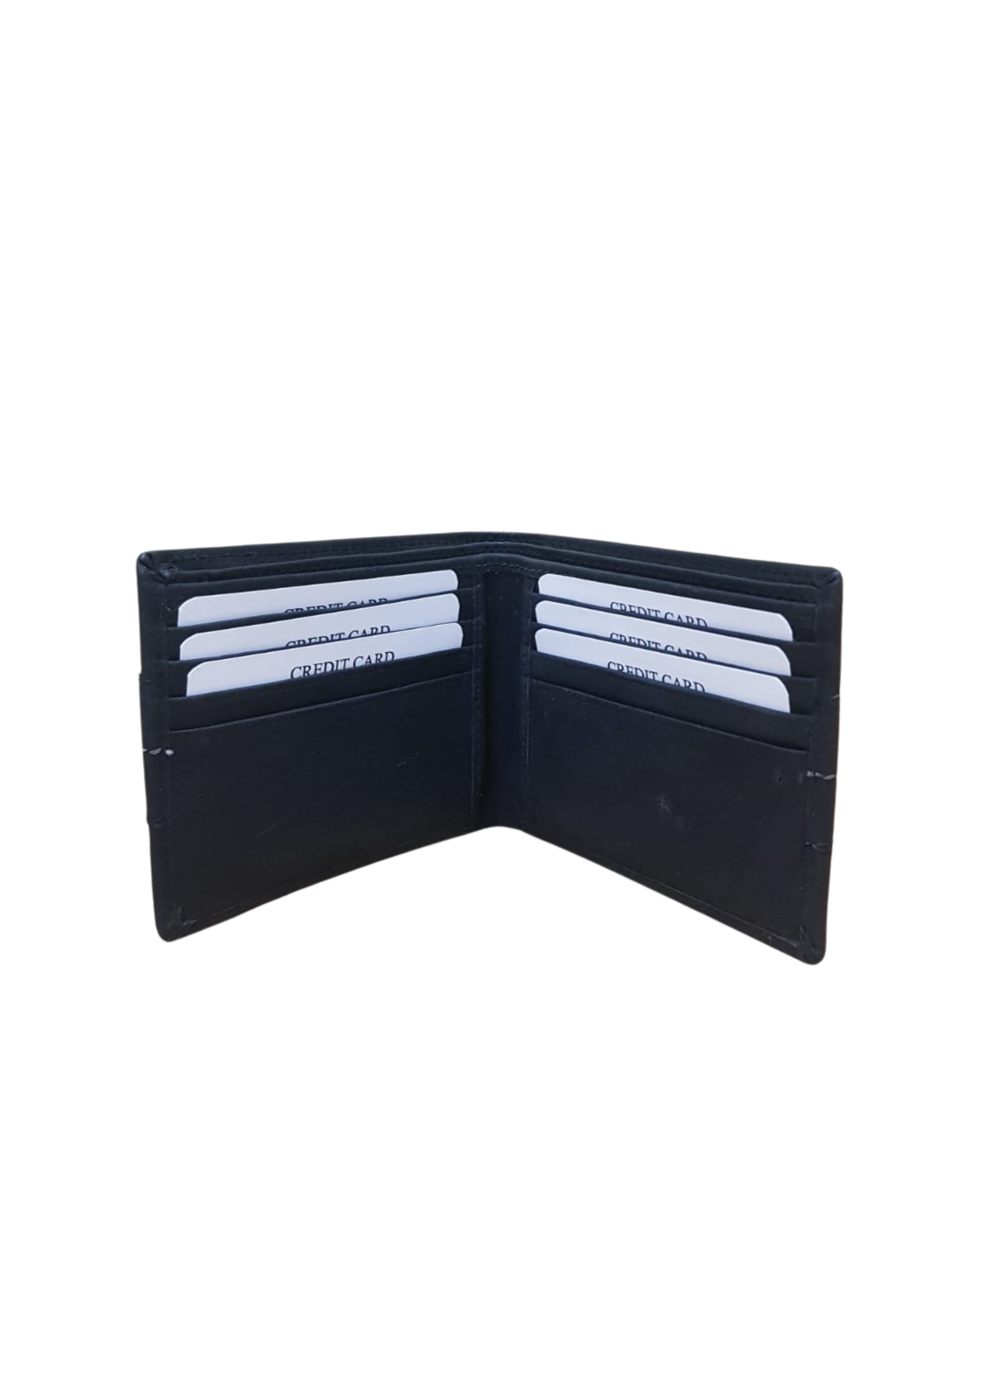 Two Fold Wallet For Men